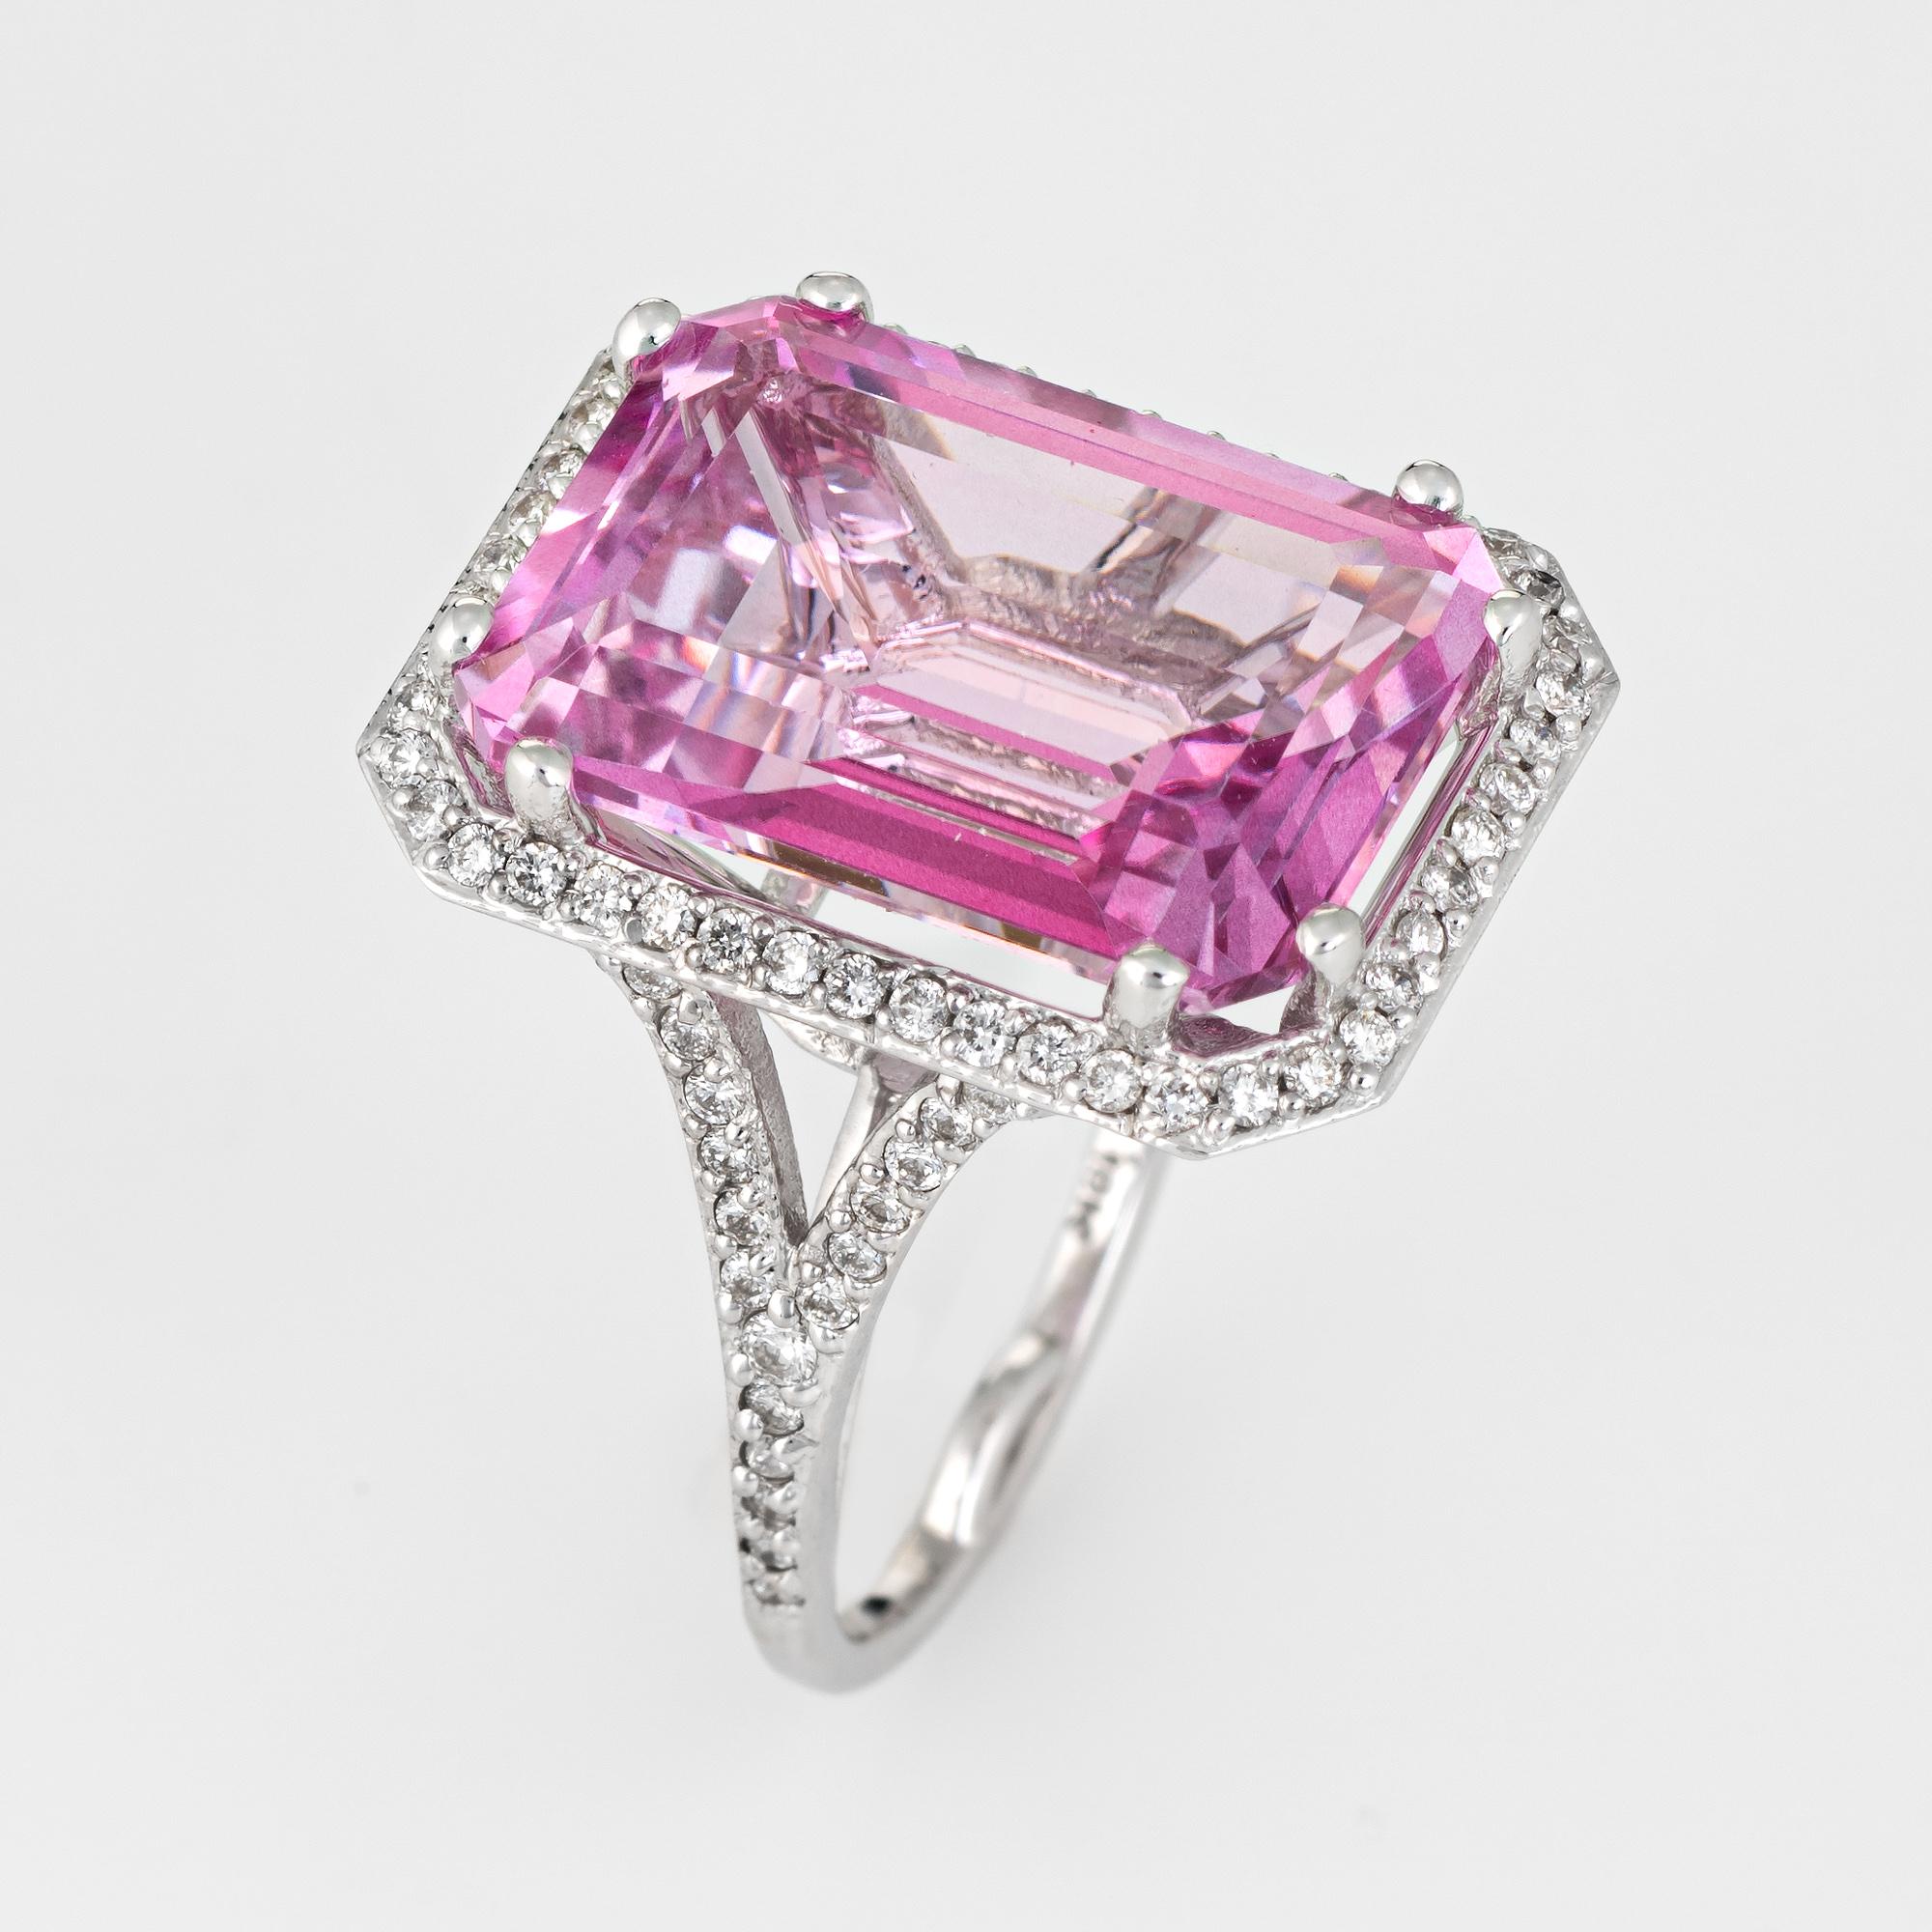 Finely detailed estate pink topaz & diamond cocktail ring, crafted in 18 karat white gold. 

One emerald cut Topaz, approx. 17.70 carats (18.0 x 13.0 x 8.0mm), medium pink color (due to a coating applied to the surface), nearly flawless, very good